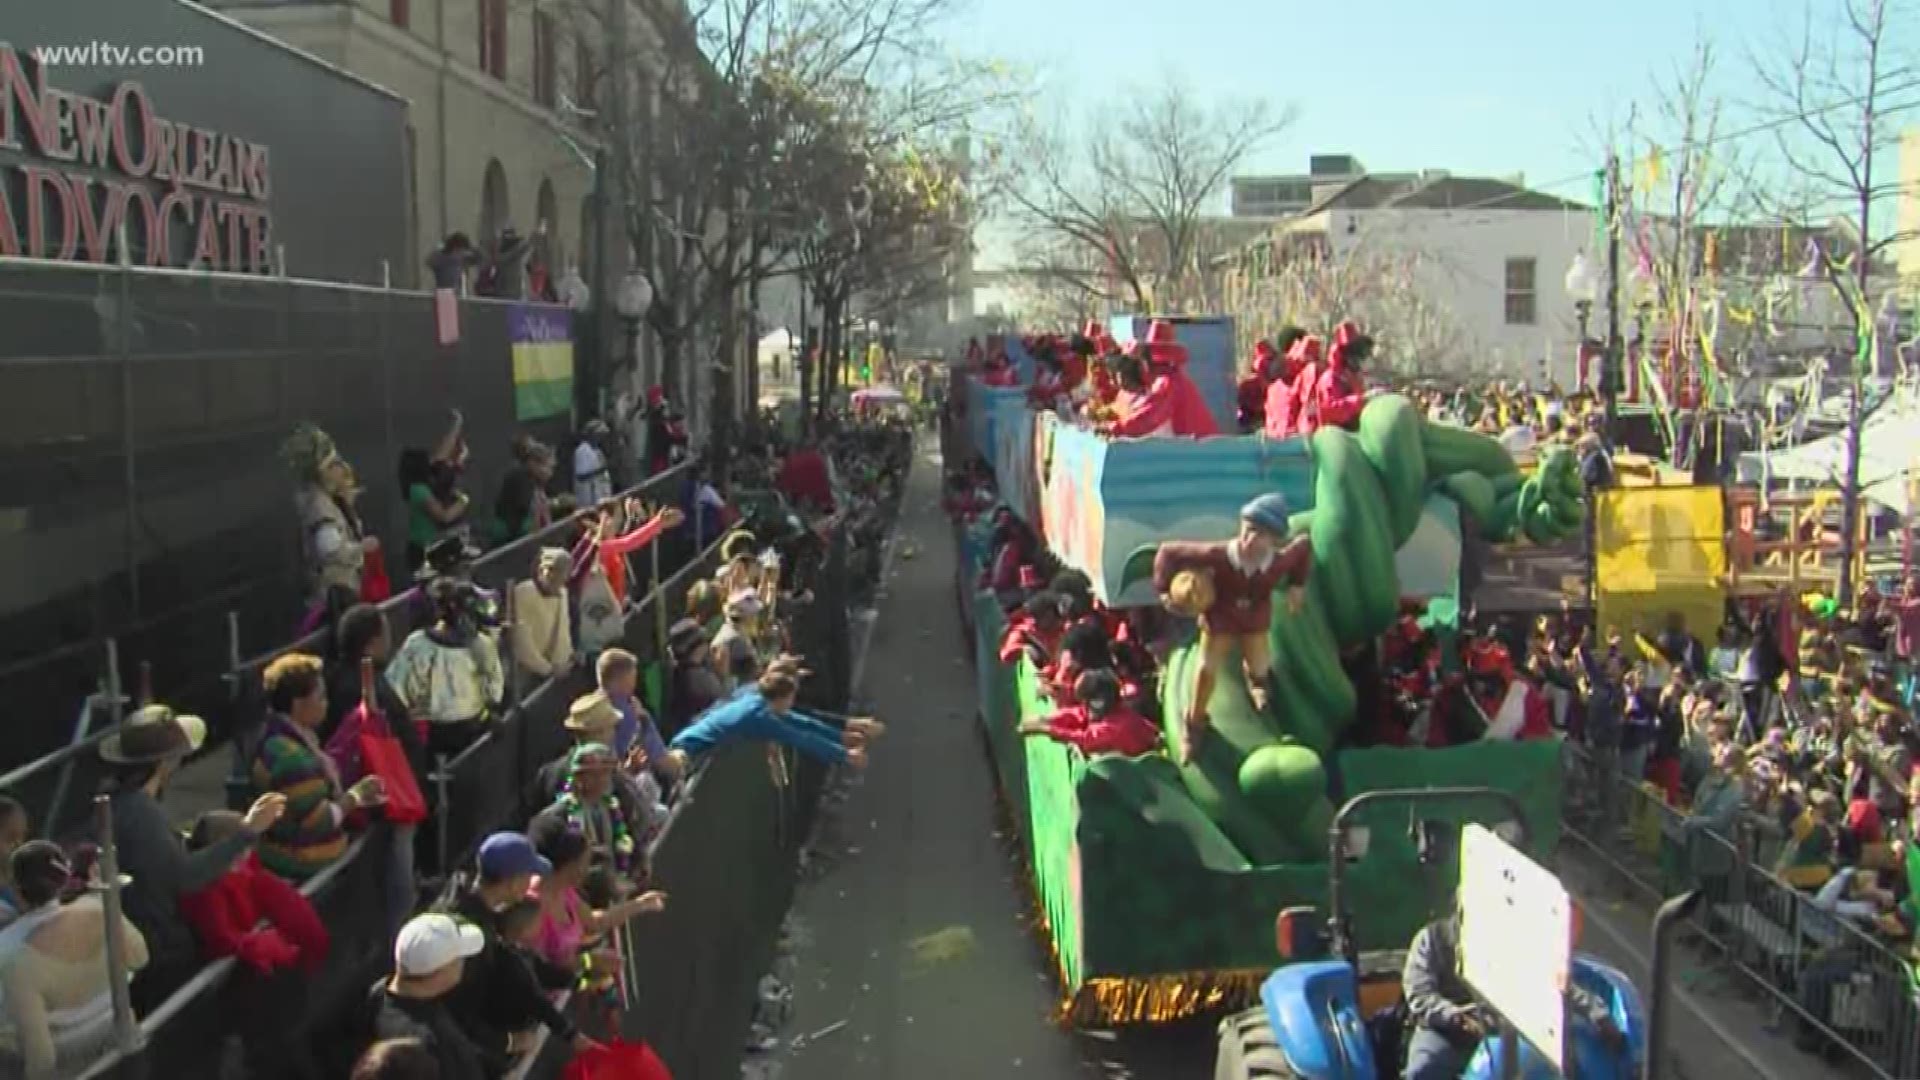 Check out a full list of the parades and dates this year.